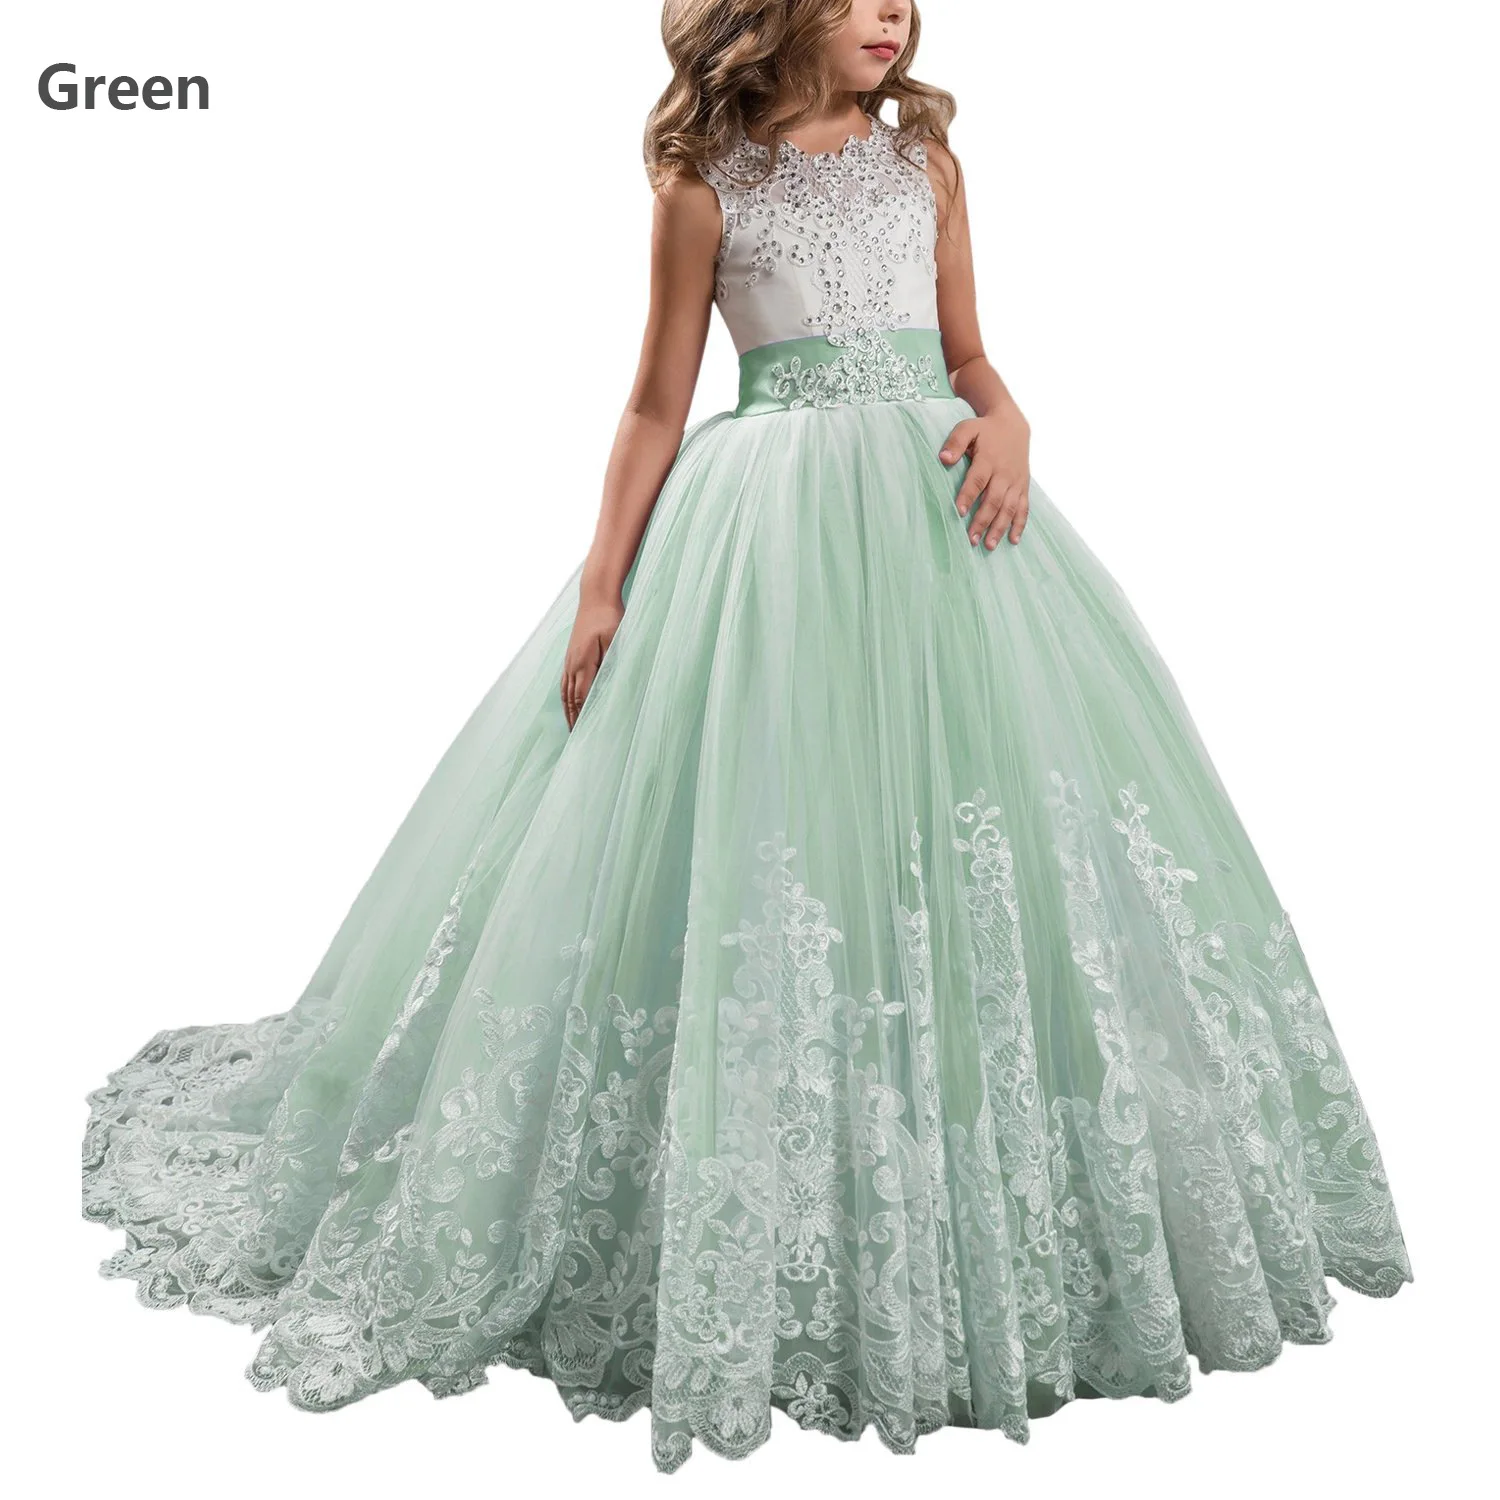 Lovely Lace Girls Formal Dress Sleeveless Beaded Balllgown Flower Girl Dresses Wedding Guest Party Gown Many Colors